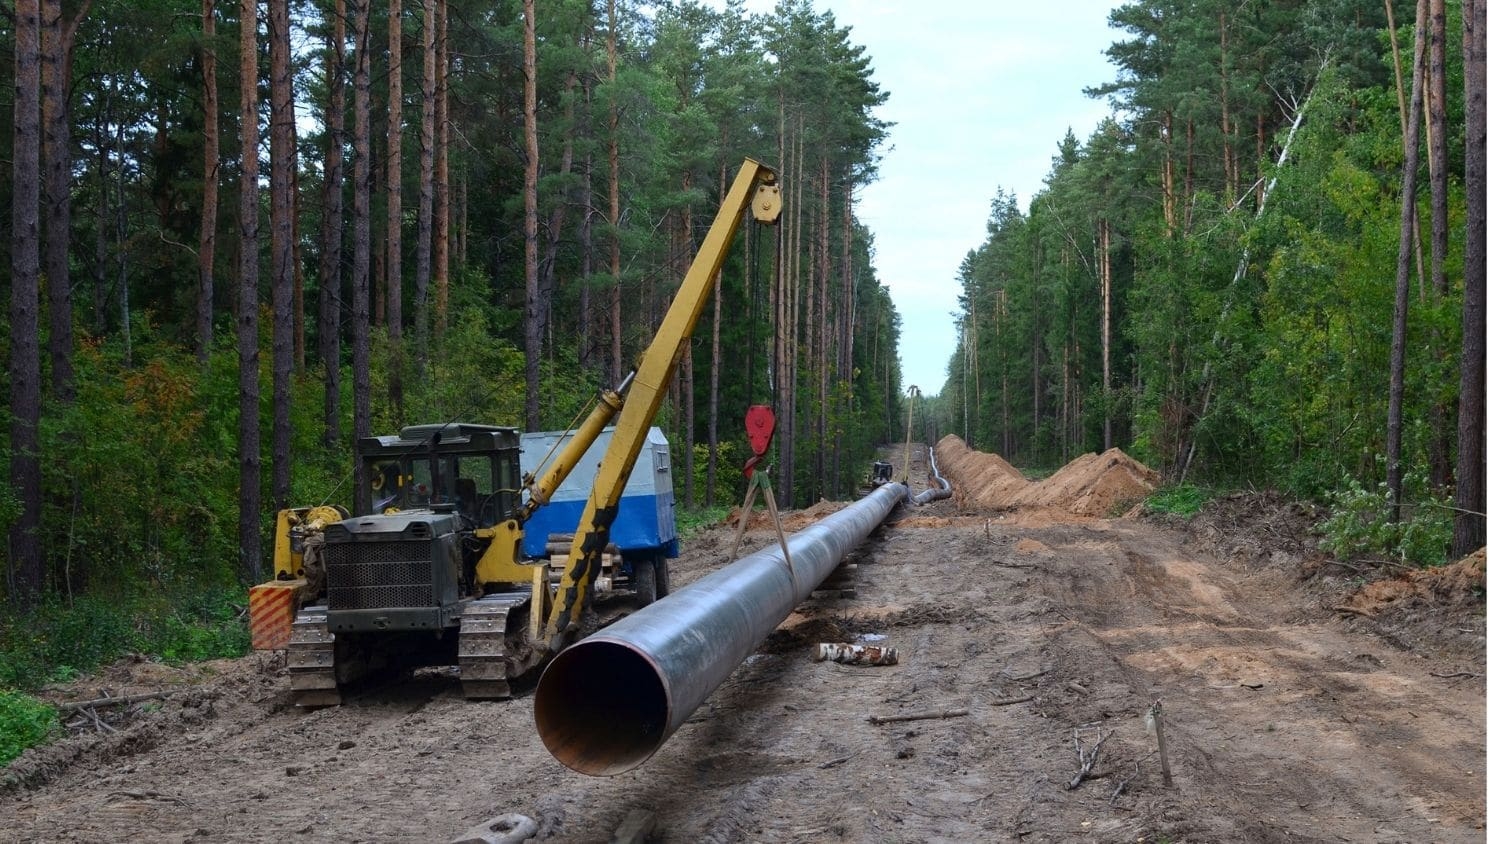 Natural pipeline construction - Natural Gas Pipeline Density Higher Overall in More Vulnerable U.S. Counties - Forestry and Environmental Resources NC State University